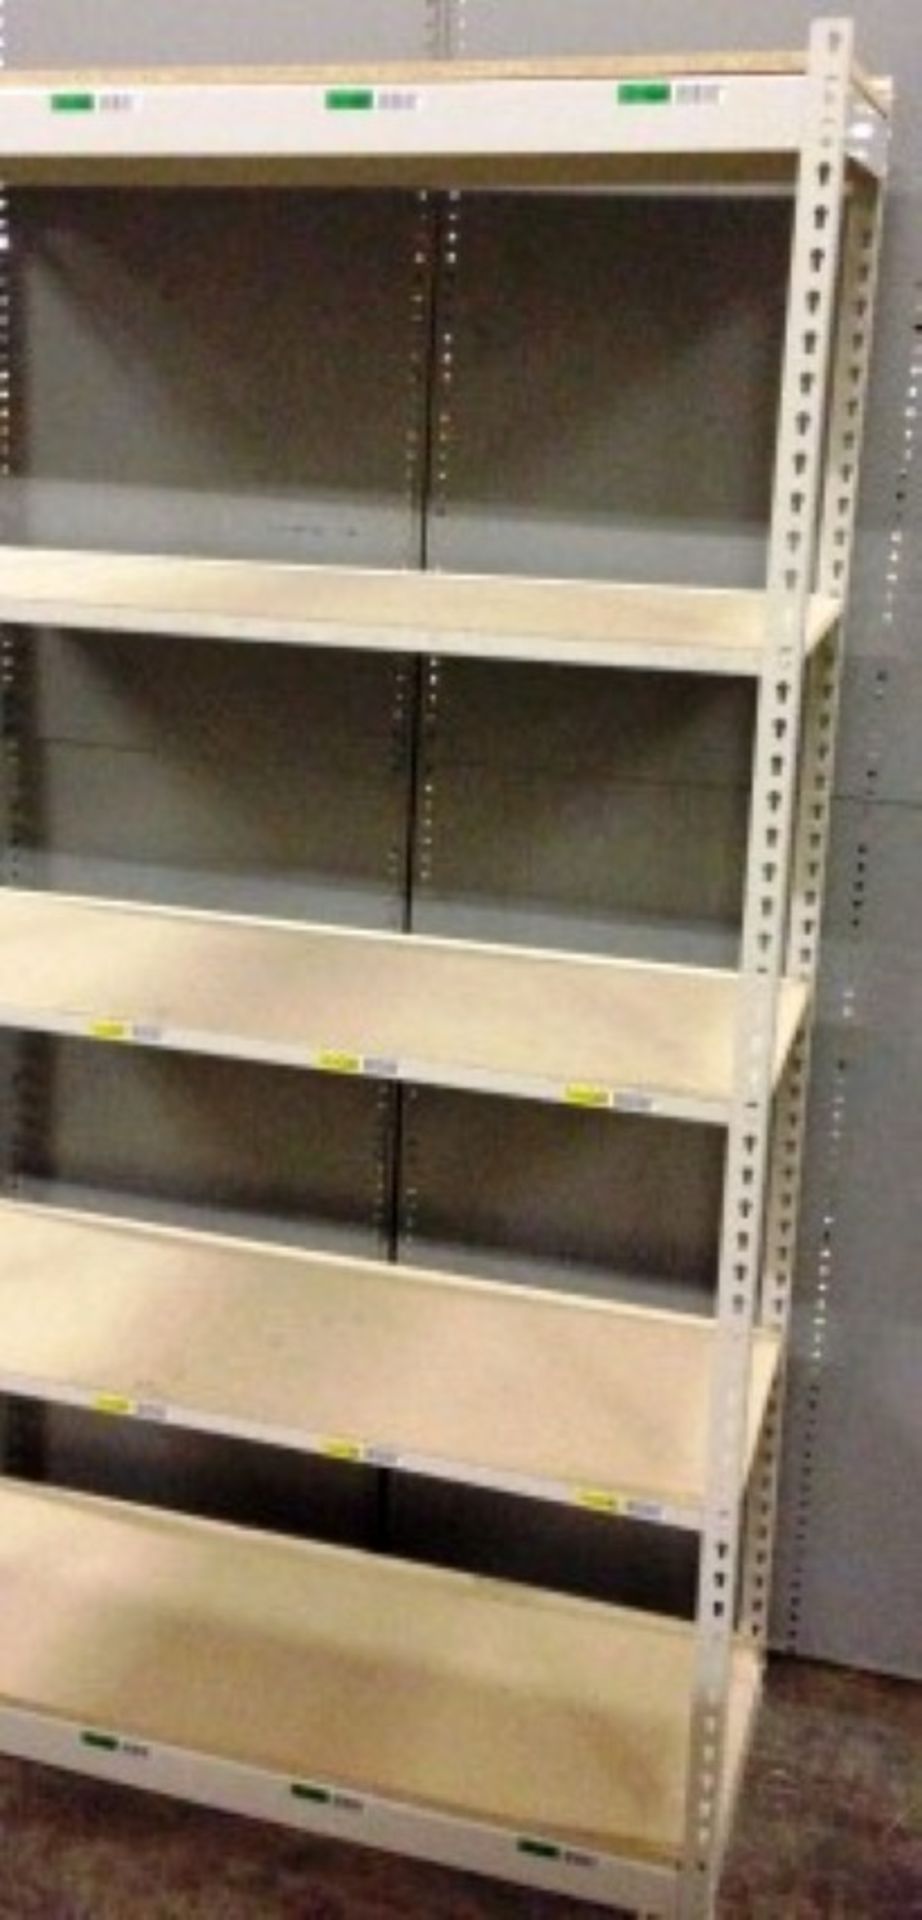 ONE LOT OF 10 SECTIONS OF RIVETIER INDUSTRIAL SHELVING,  EACH SIZE 18"D X 48"W X 84"H, COLOR: - Image 4 of 5